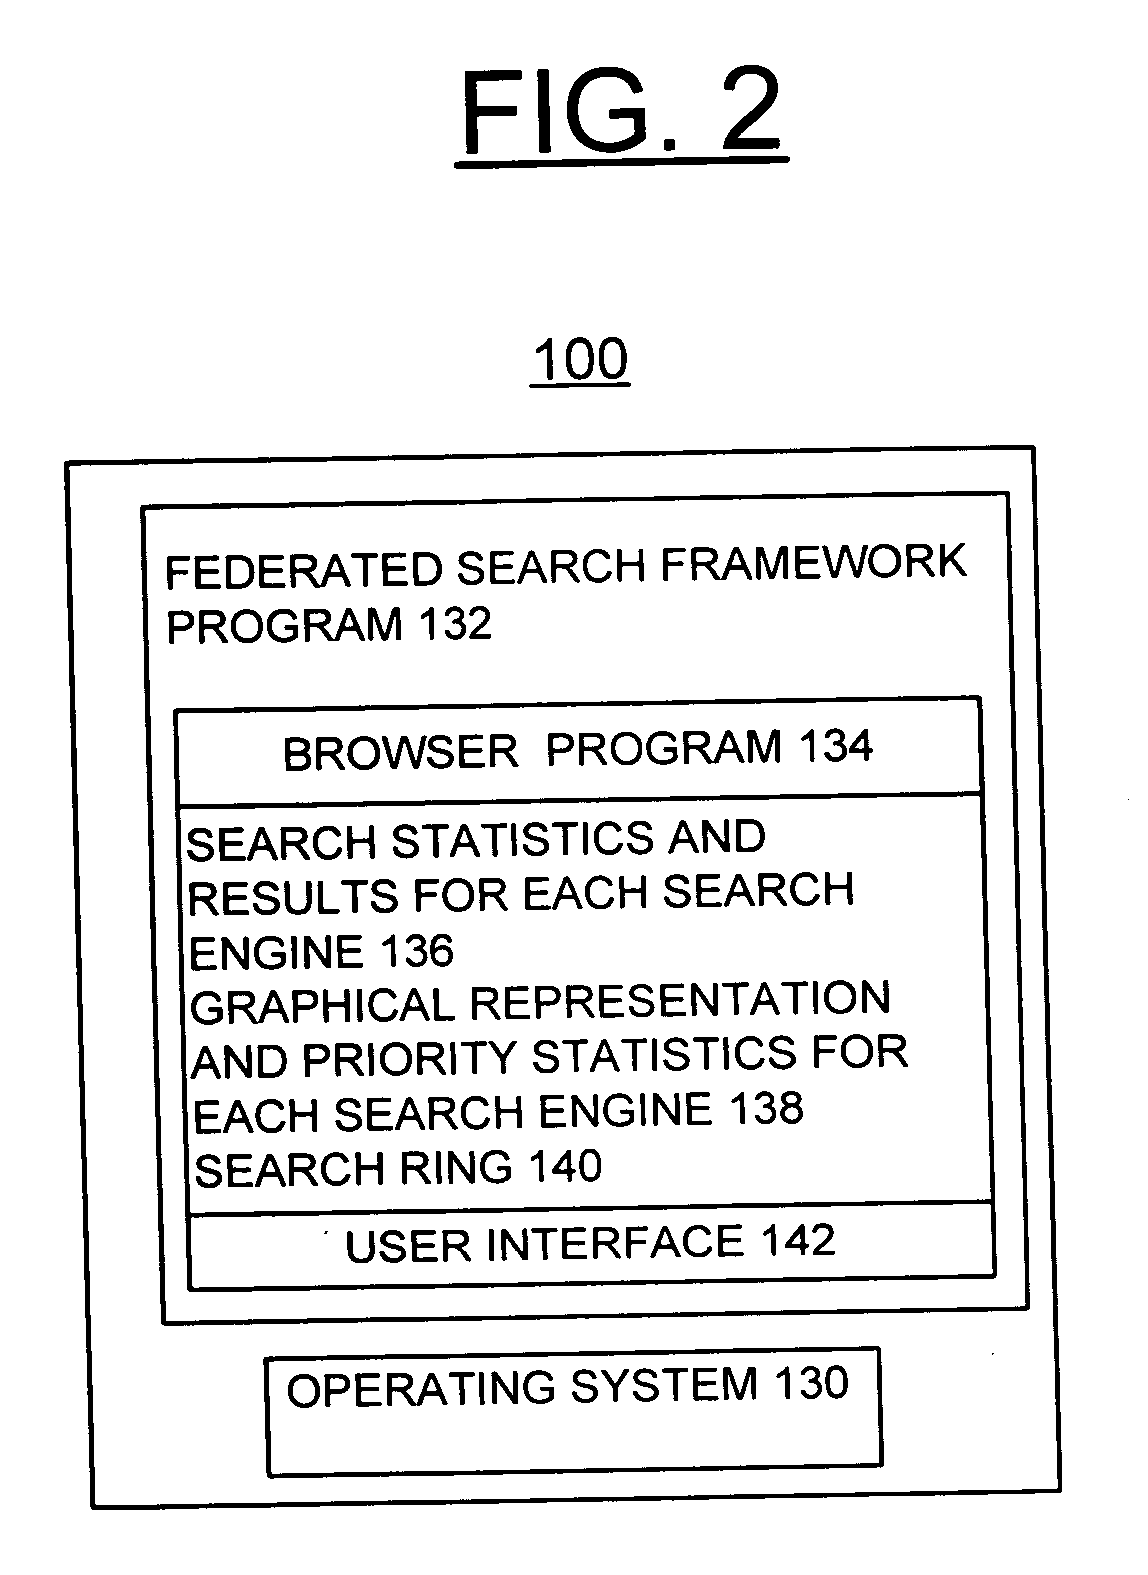 Ring method, apparatus, and computer program product for managing federated search results in a heterogeneous environment